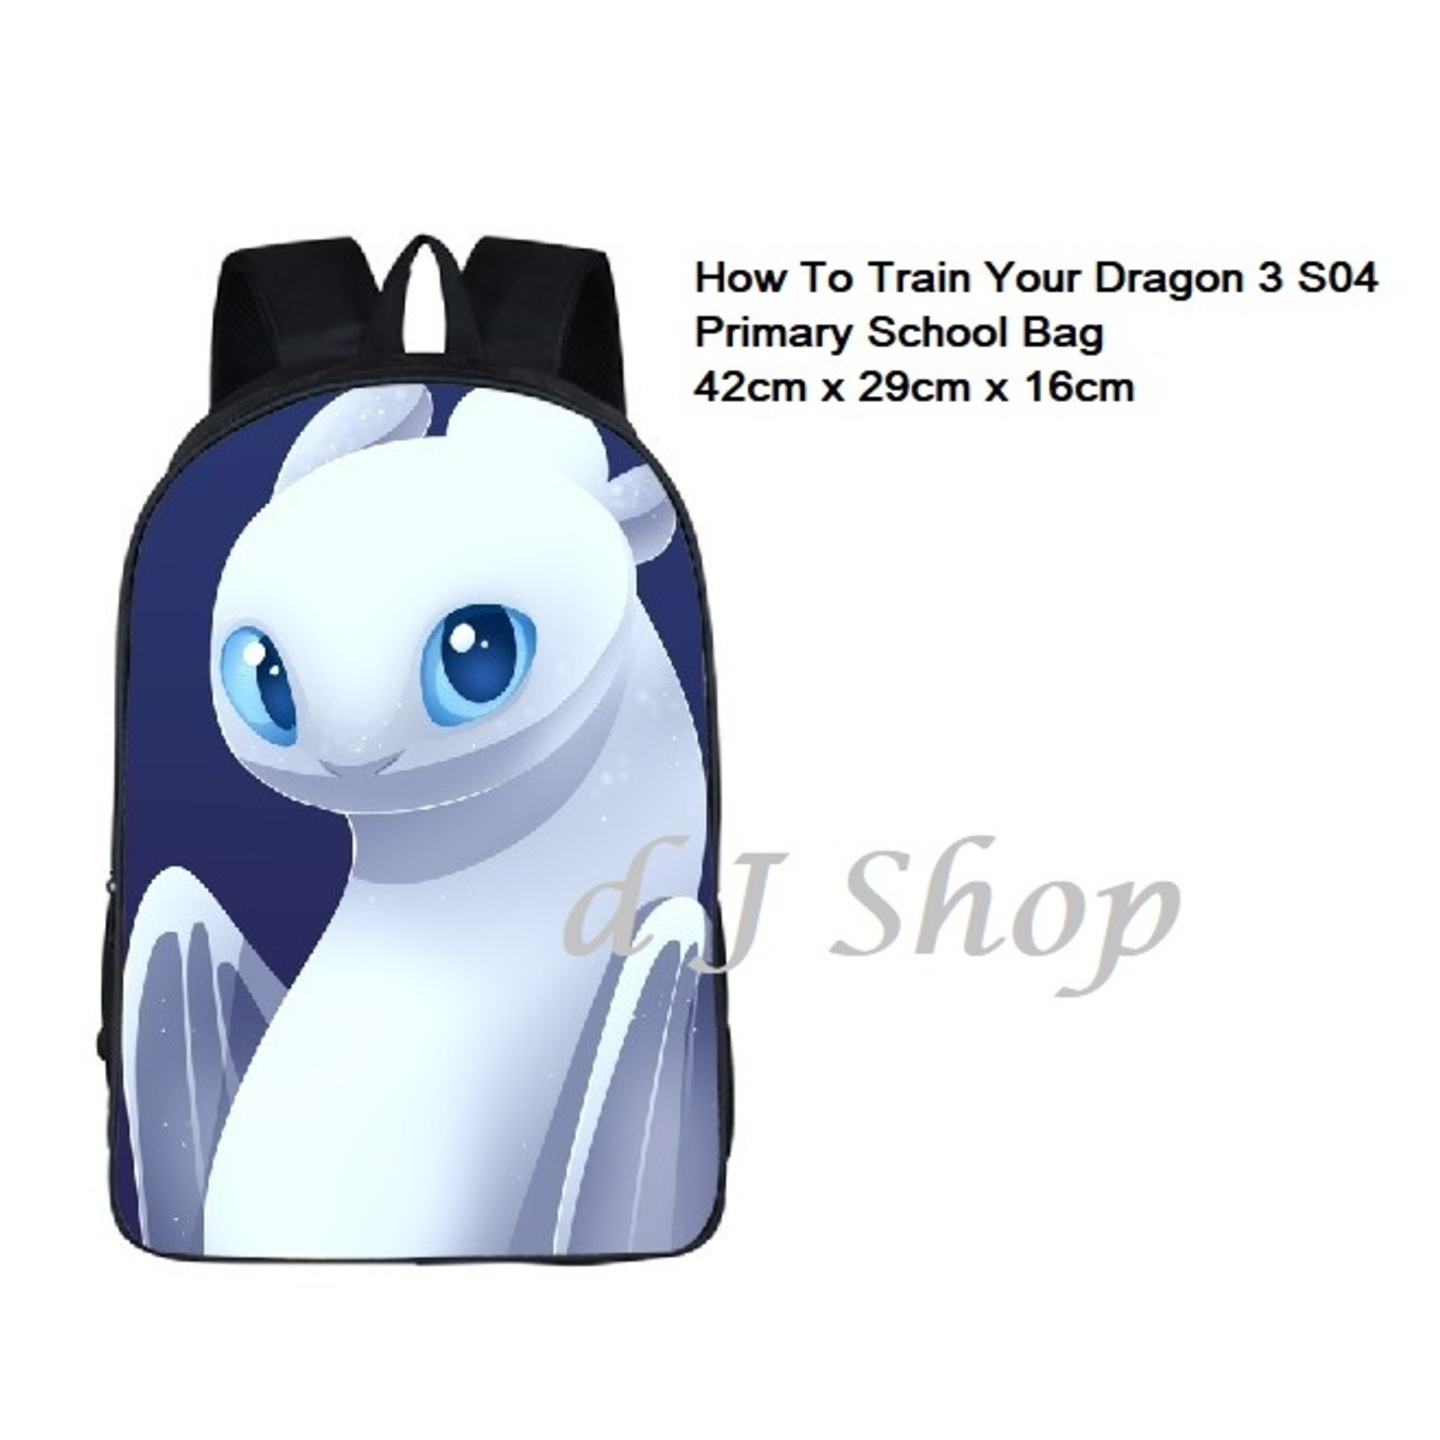 Preorder: How To Train Your Dragon 3 Backpack How To Train Your Dragon